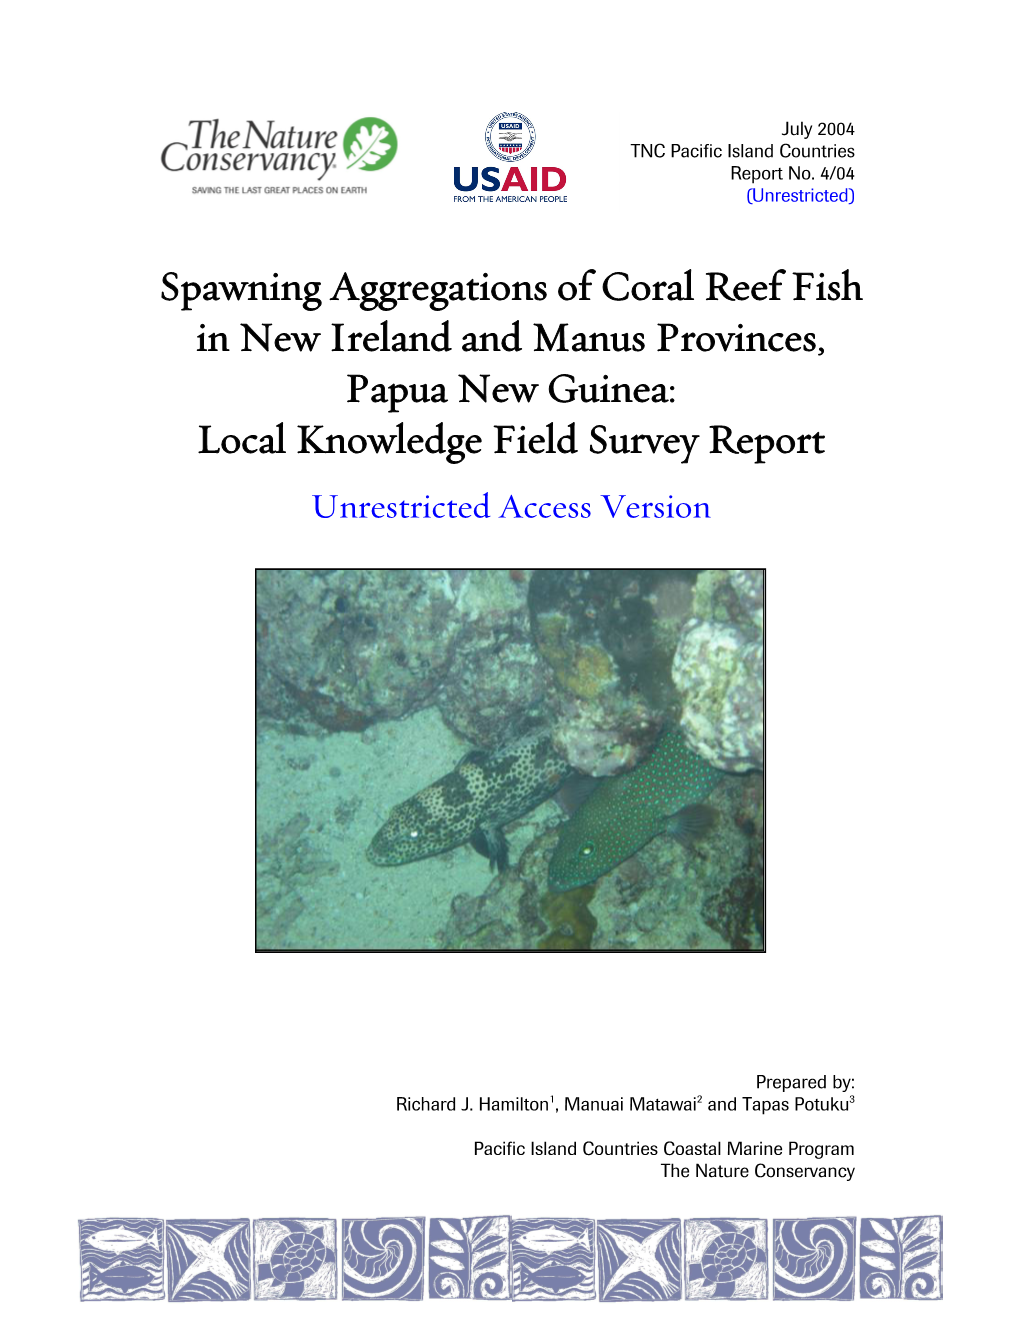 Spawning Aggregations of Coral Reef Fish in New Ireland and Manus Provinces, Papua New Guinea: Local Knowledge Field Survey Report